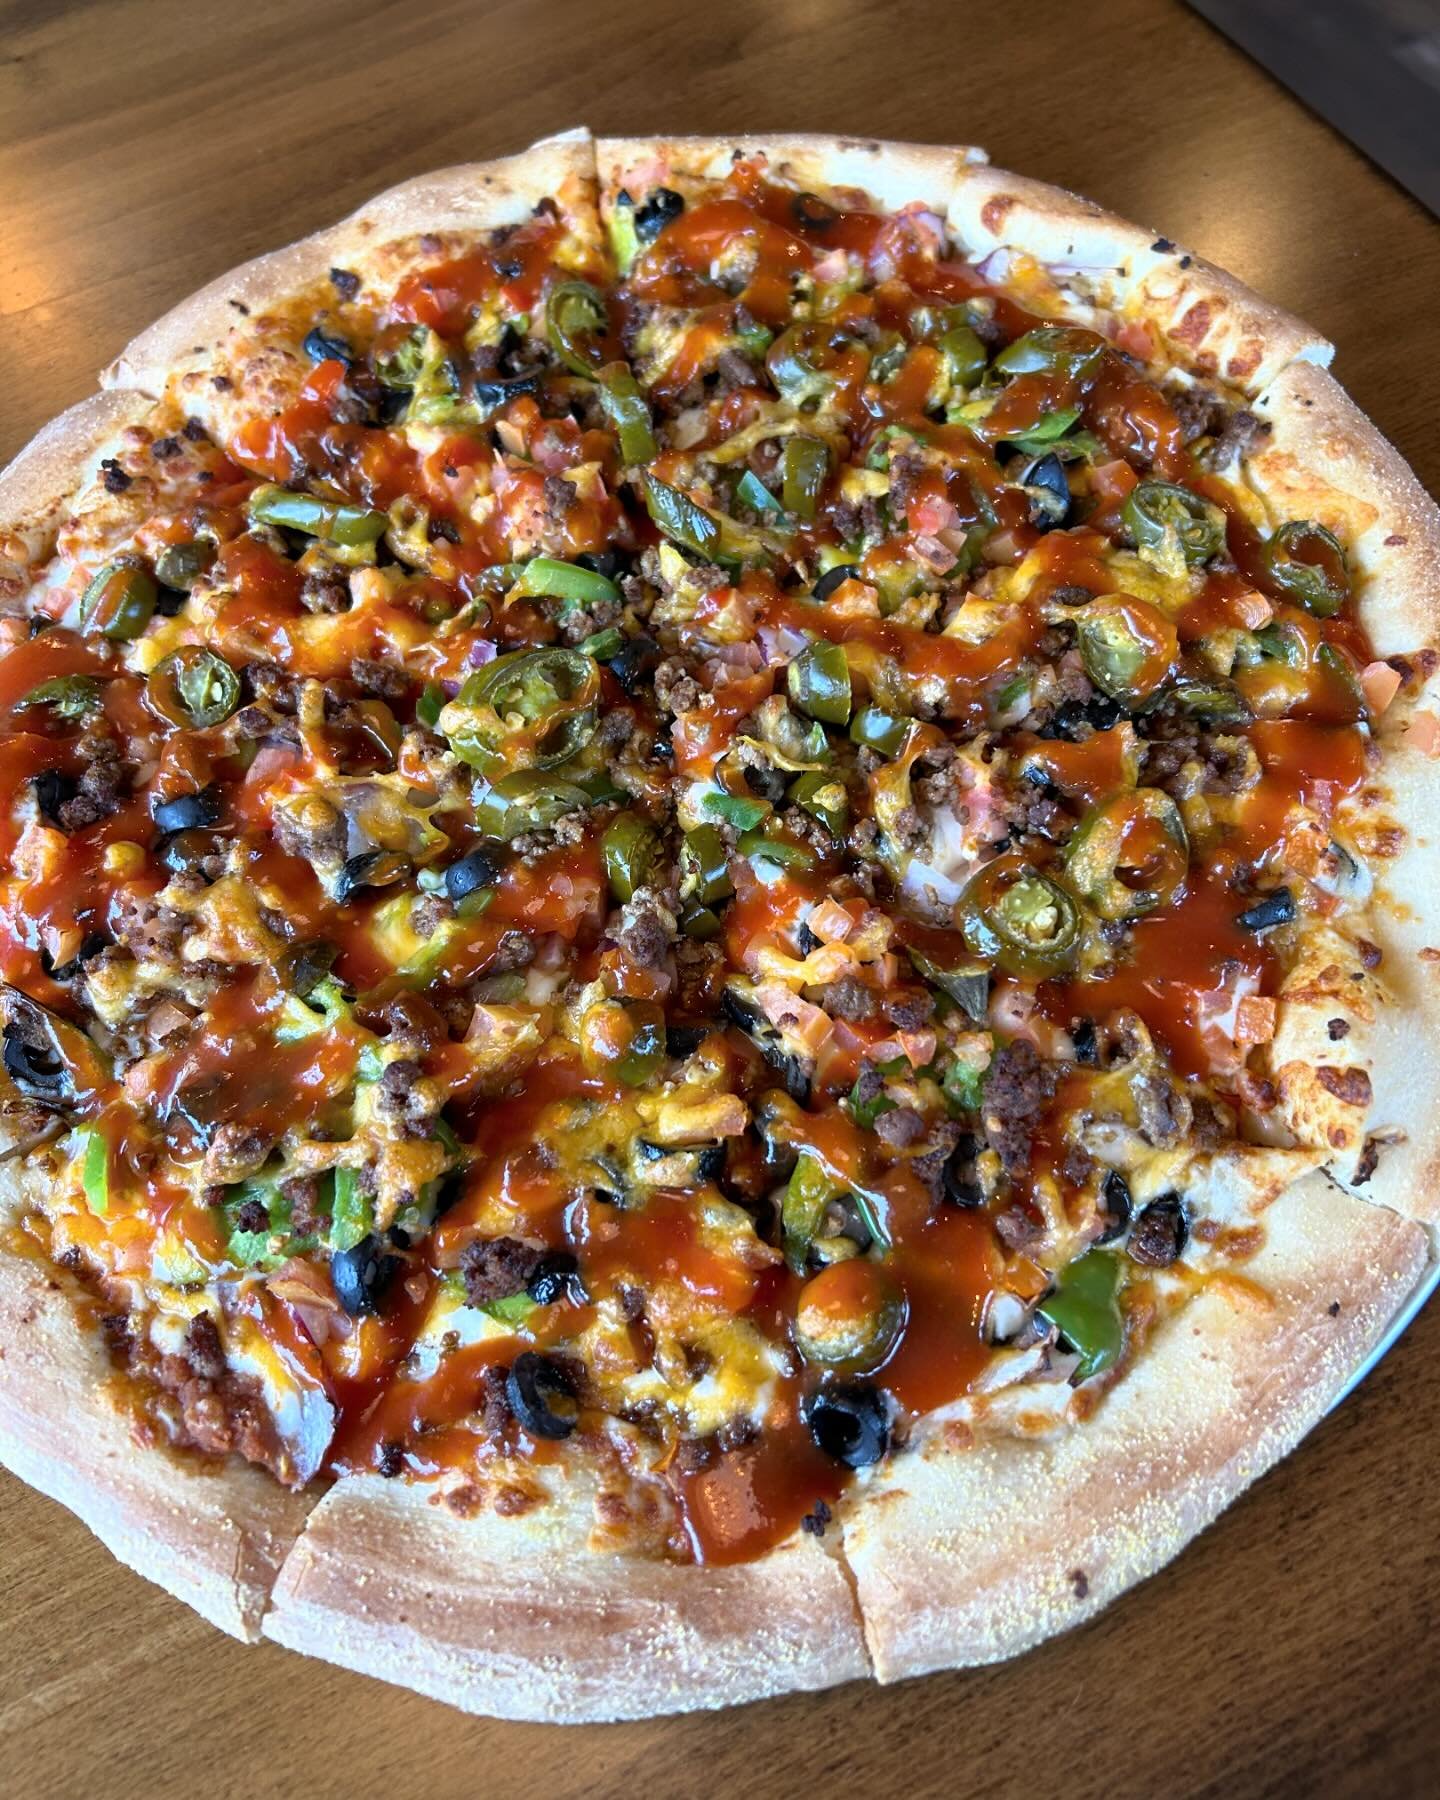 THE SANTA FE 🌵☀️ is back on our menus starting on CINCO DE MAYO !! We&rsquo;re bringing this pie out of the vault early for the special occasion and for a limited time. Our most filling pizza maybe ever with spicy refried bean sauce, cheddar cheese,